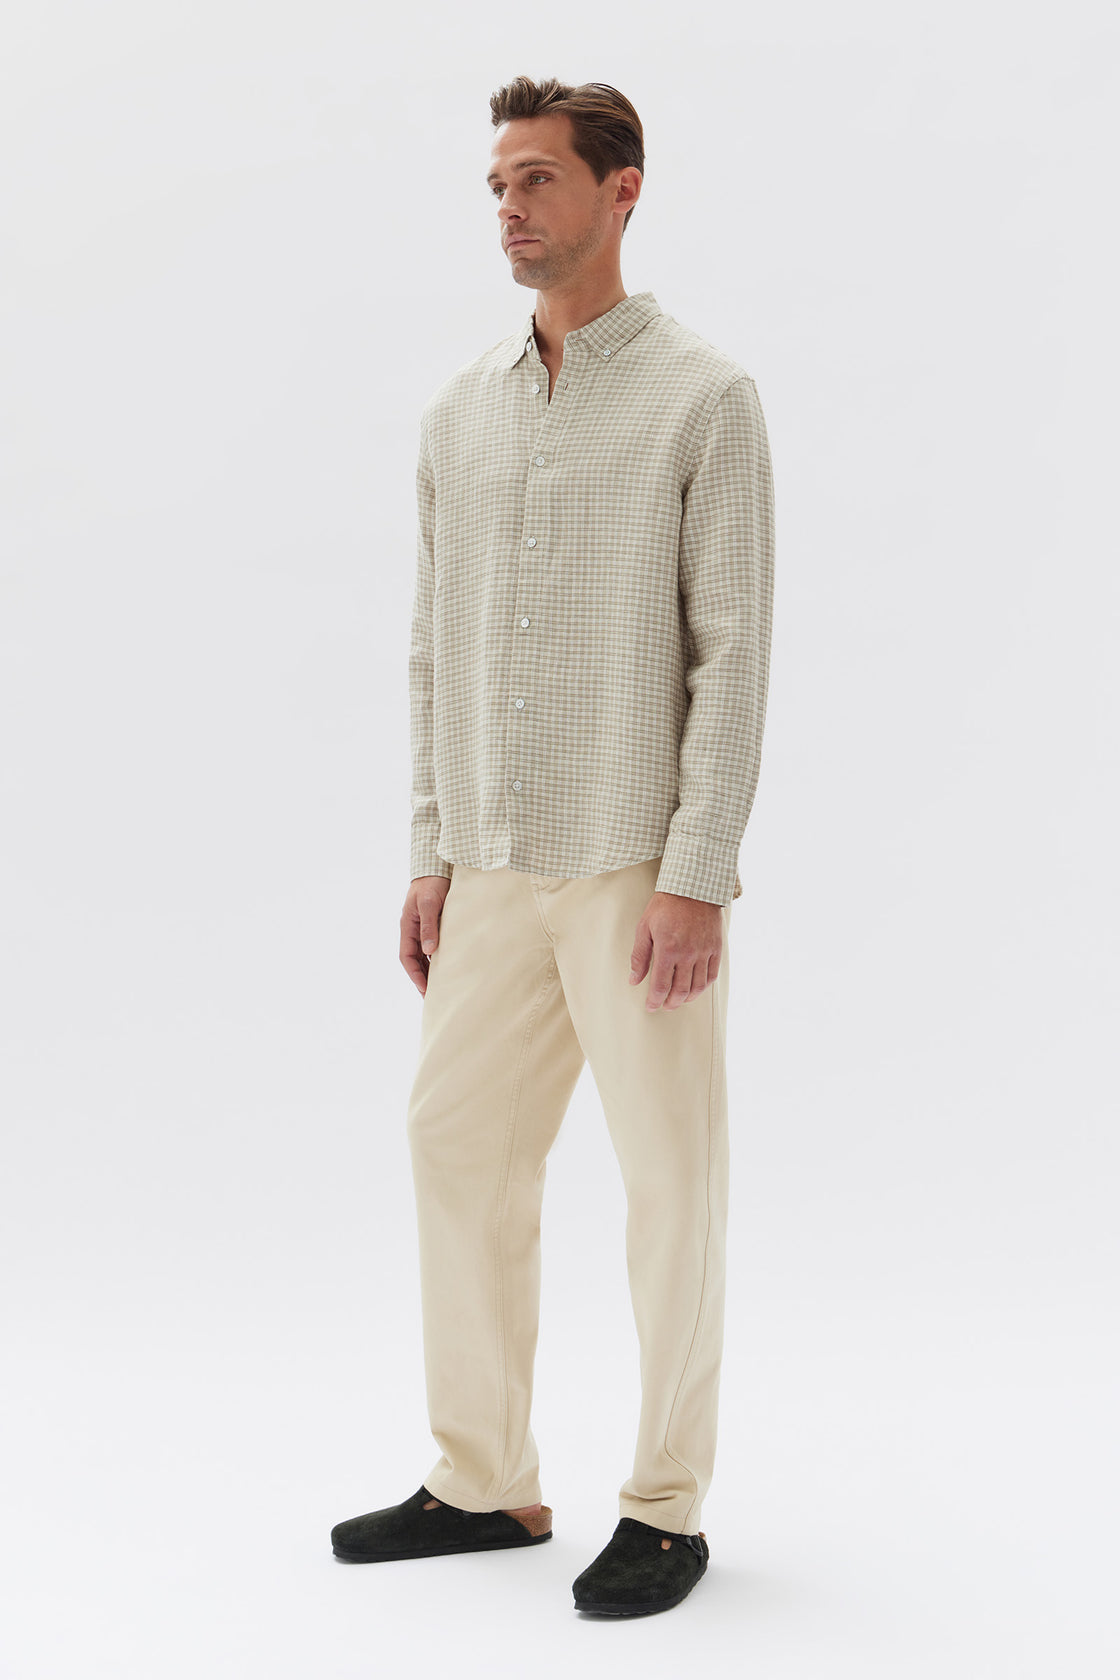 Assembly Label | Micro Check Long Sleeve Shirt - Moss Check